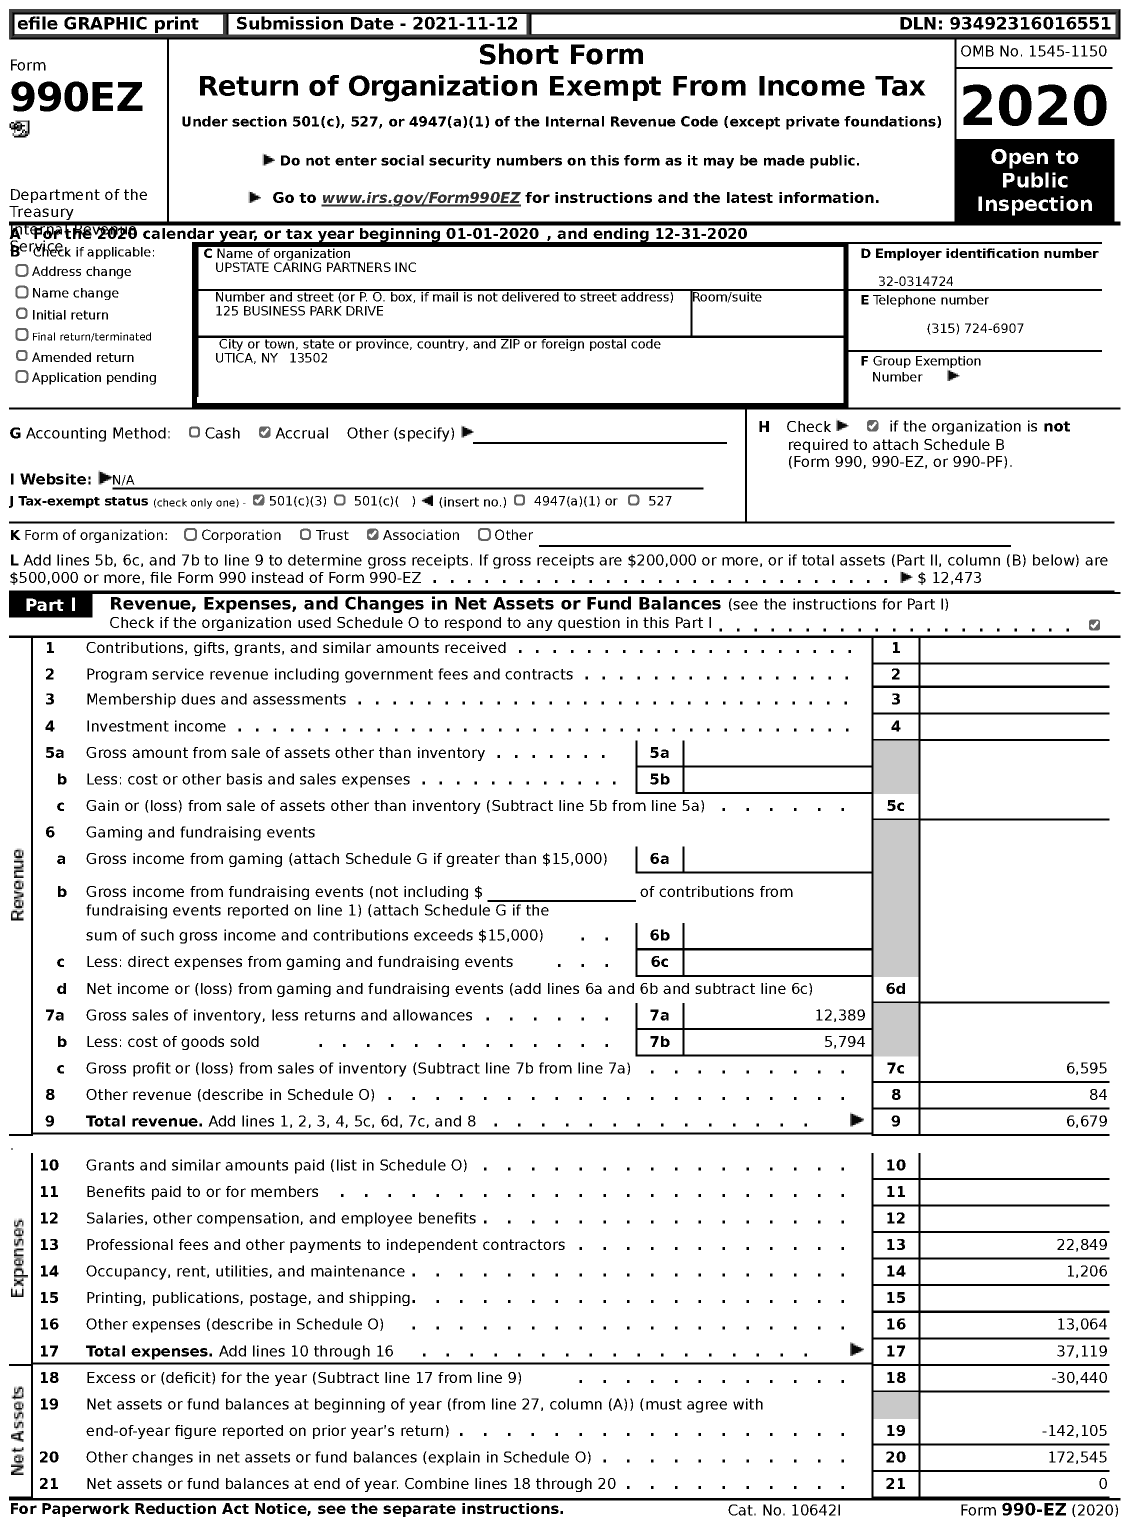 Image of first page of 2020 Form 990EZ for Upstate Caring Partners Holding Company